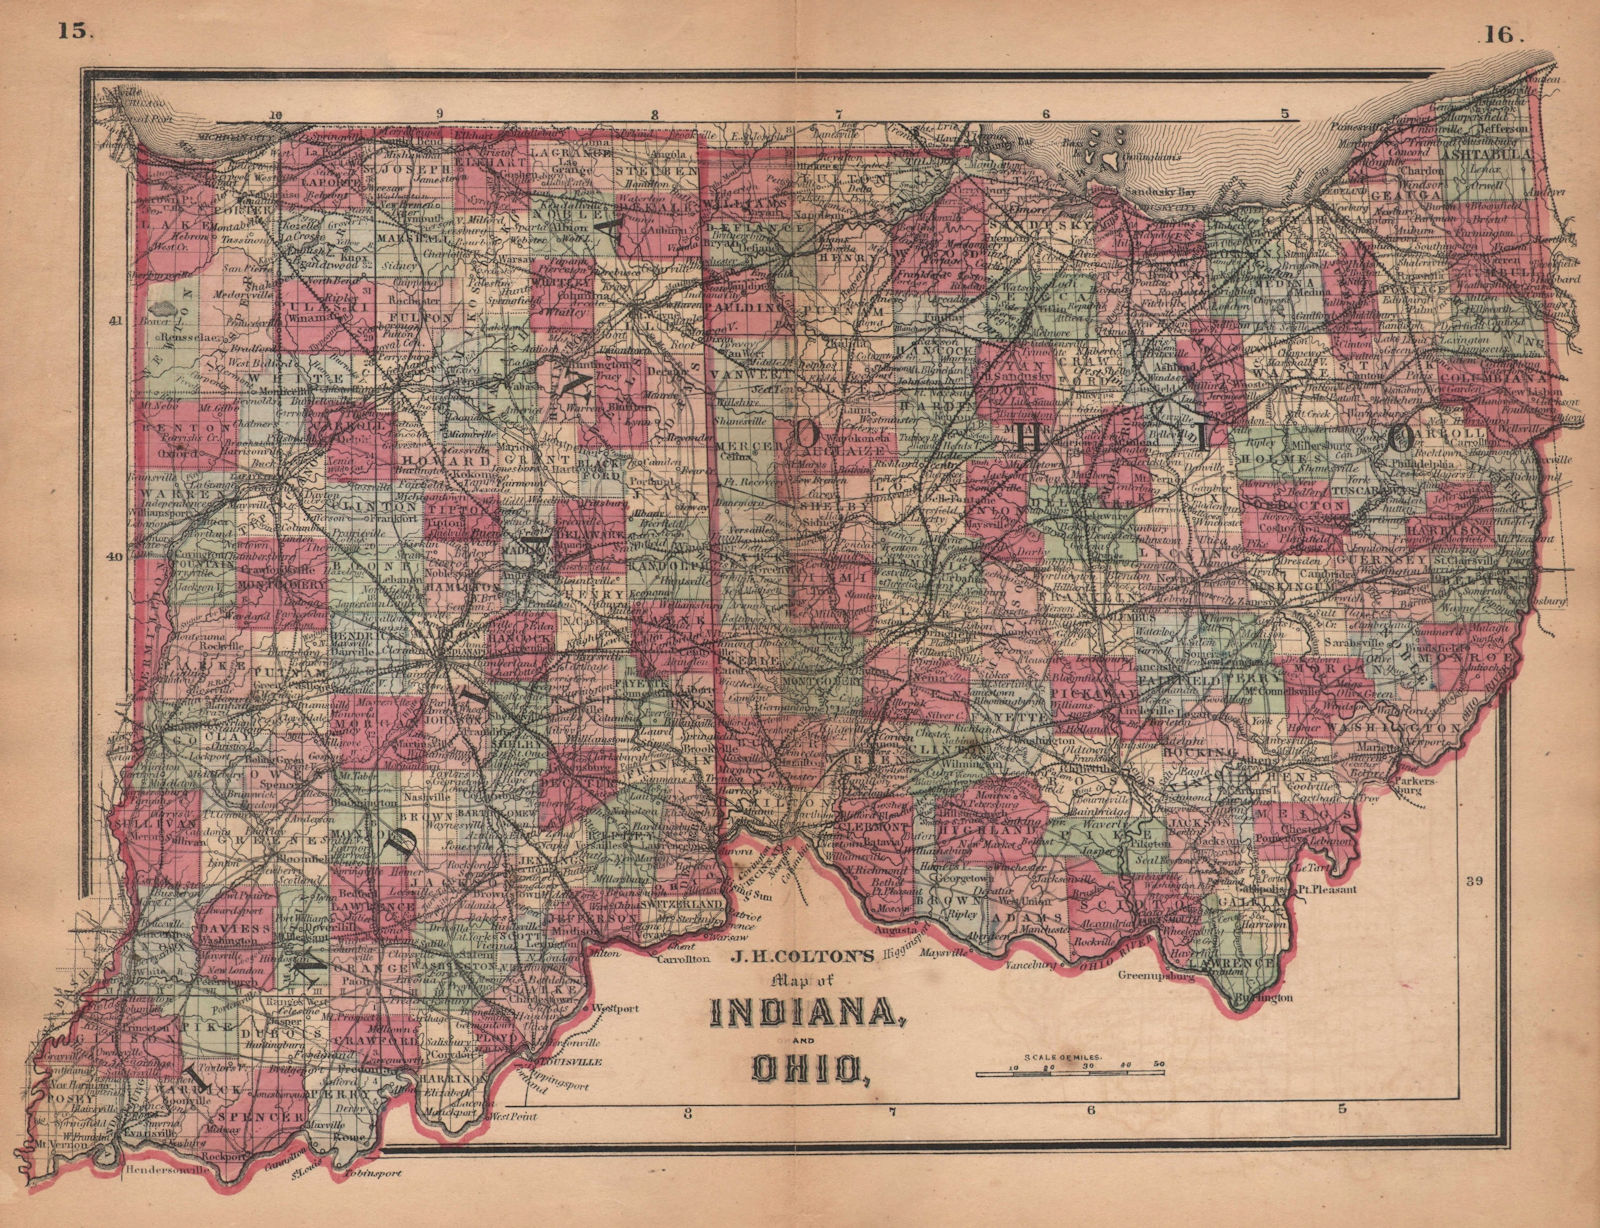 Associate Product J. H. Colton's map of Indiana and Ohio 1864 old antique vintage plan chart